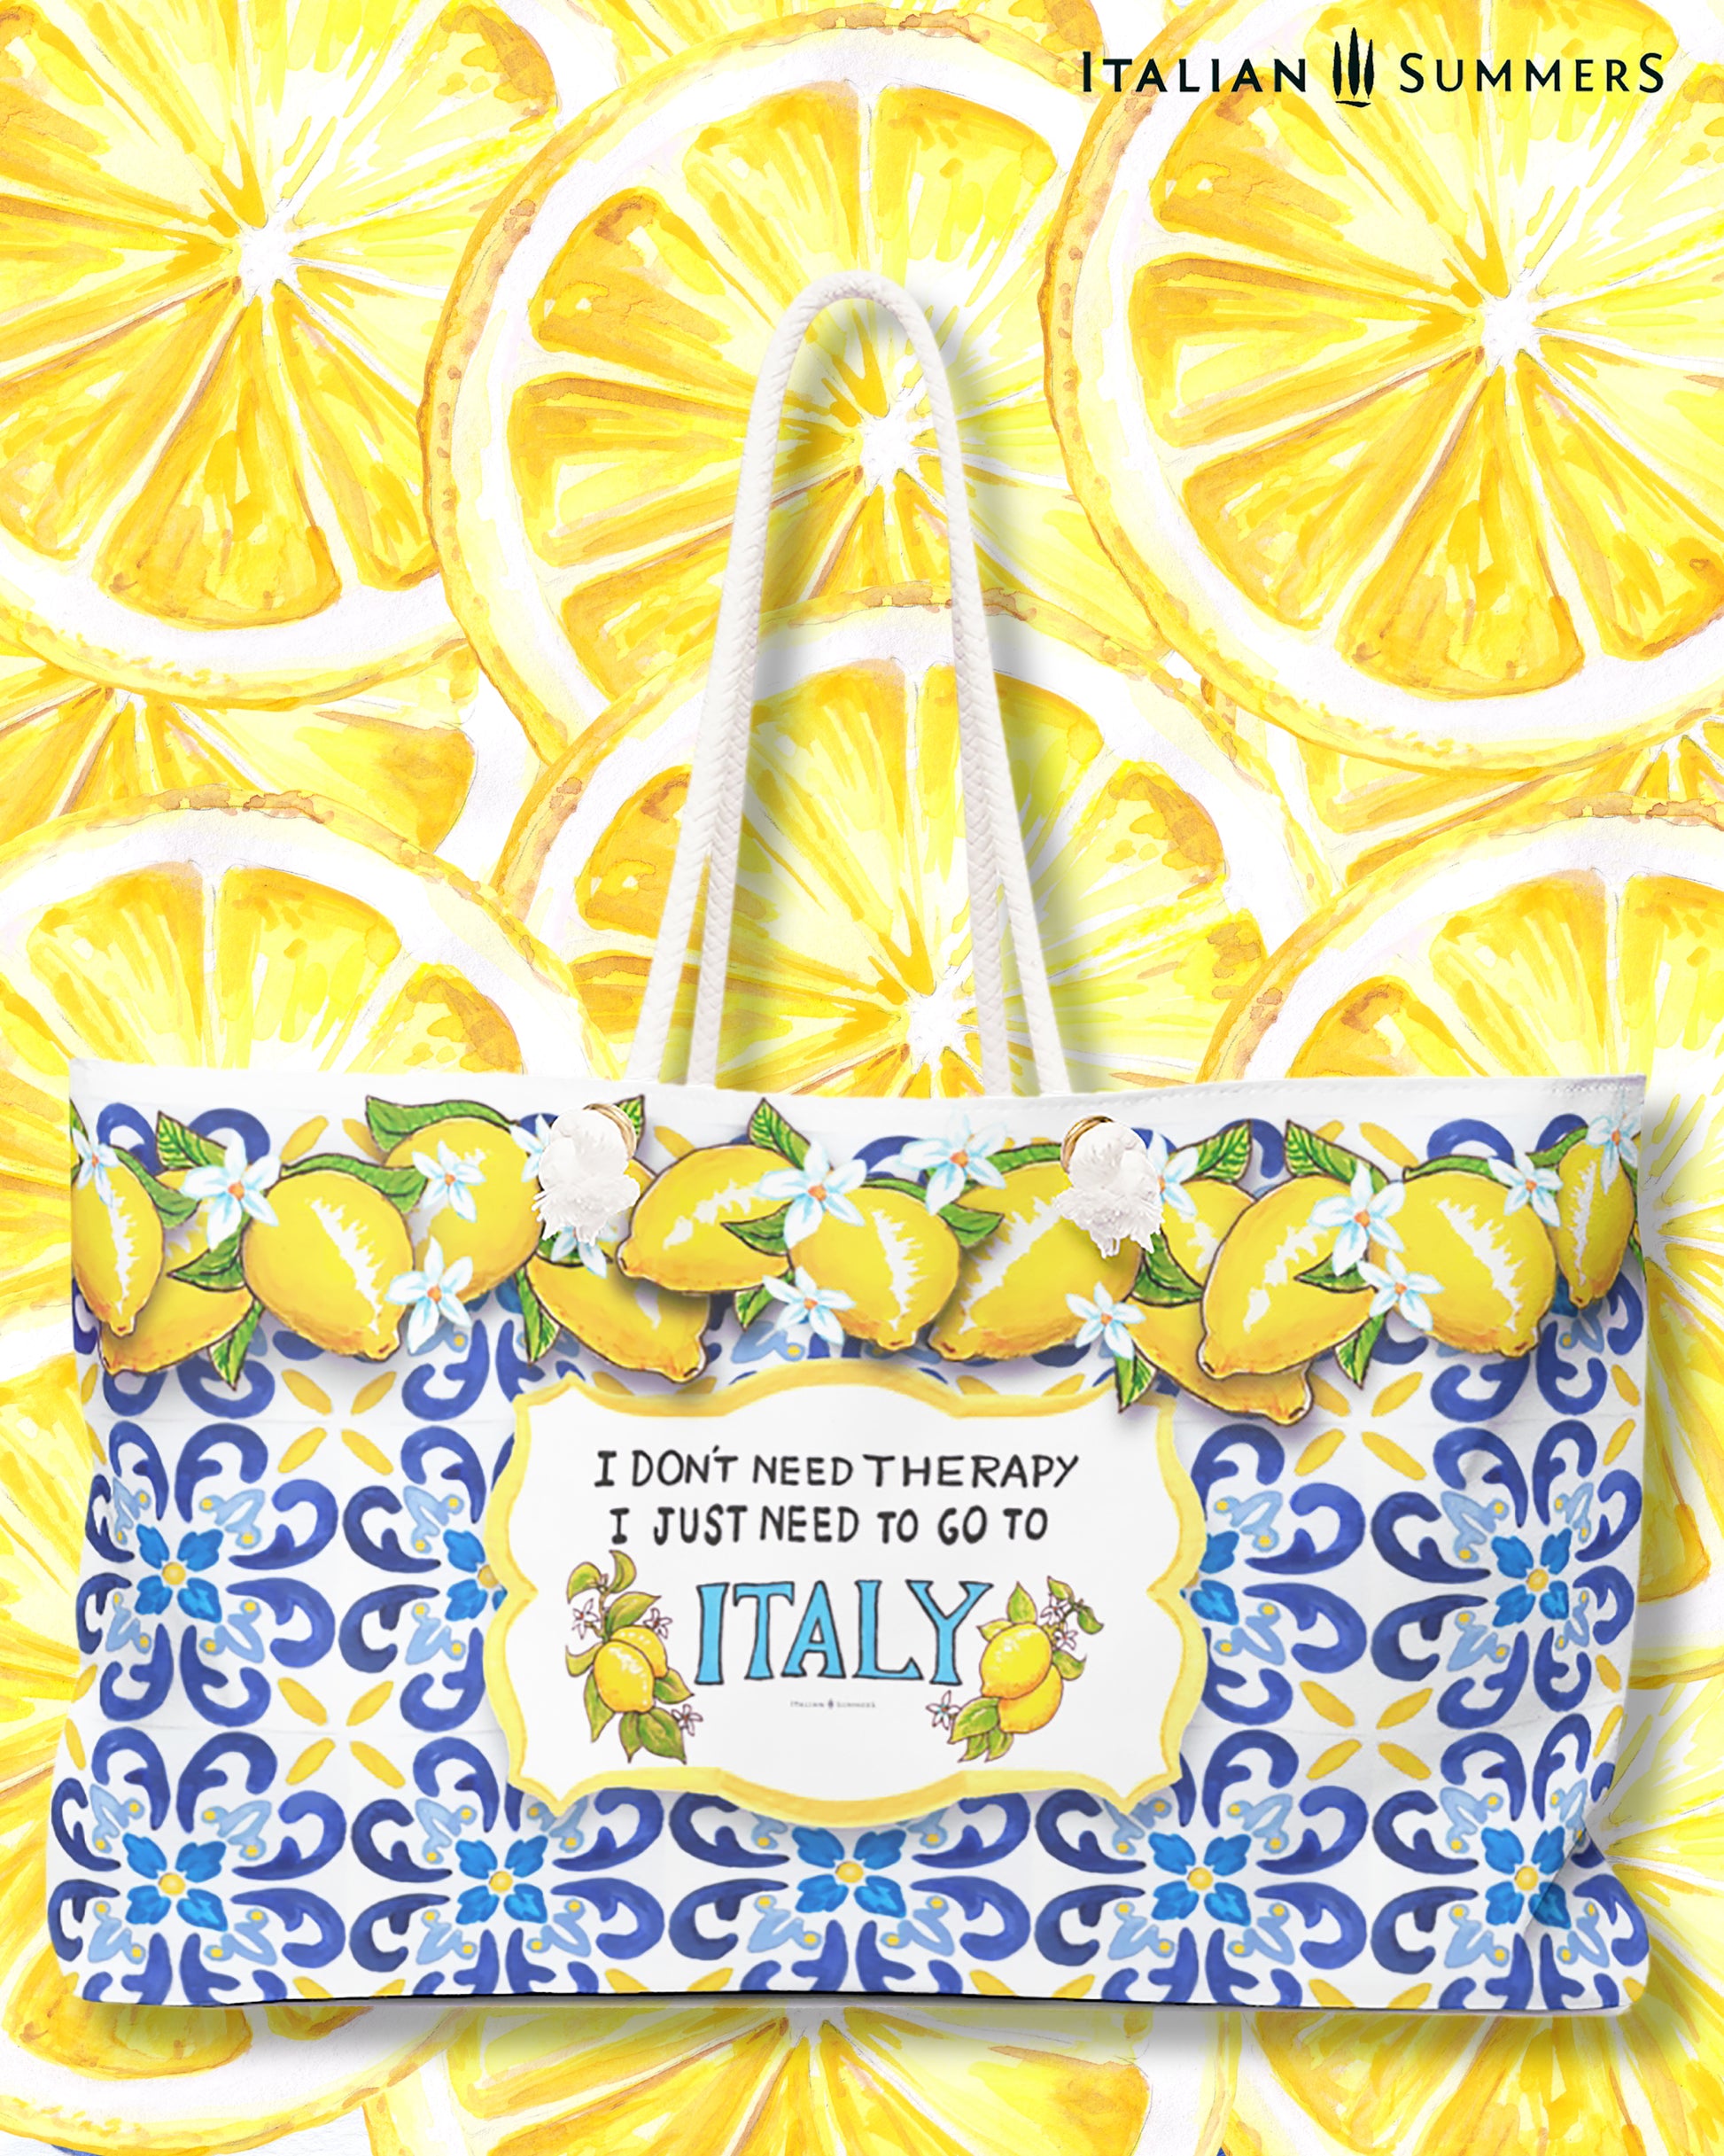 Italy inspired beach bag large model. It has the quote I don't need therapy, I just need to go to Italy. Next to the Italy writing a big Amalfi Coast lemons. The whole bag is printed with Italian tiles, colors blue with some yellow. On the rim of the bag there is a garland of lemons with lemon flowers. The quote with theblemons is placed on a white crest, and the crest is placed in the tile background. The Italy beach bag has soft rope handles.